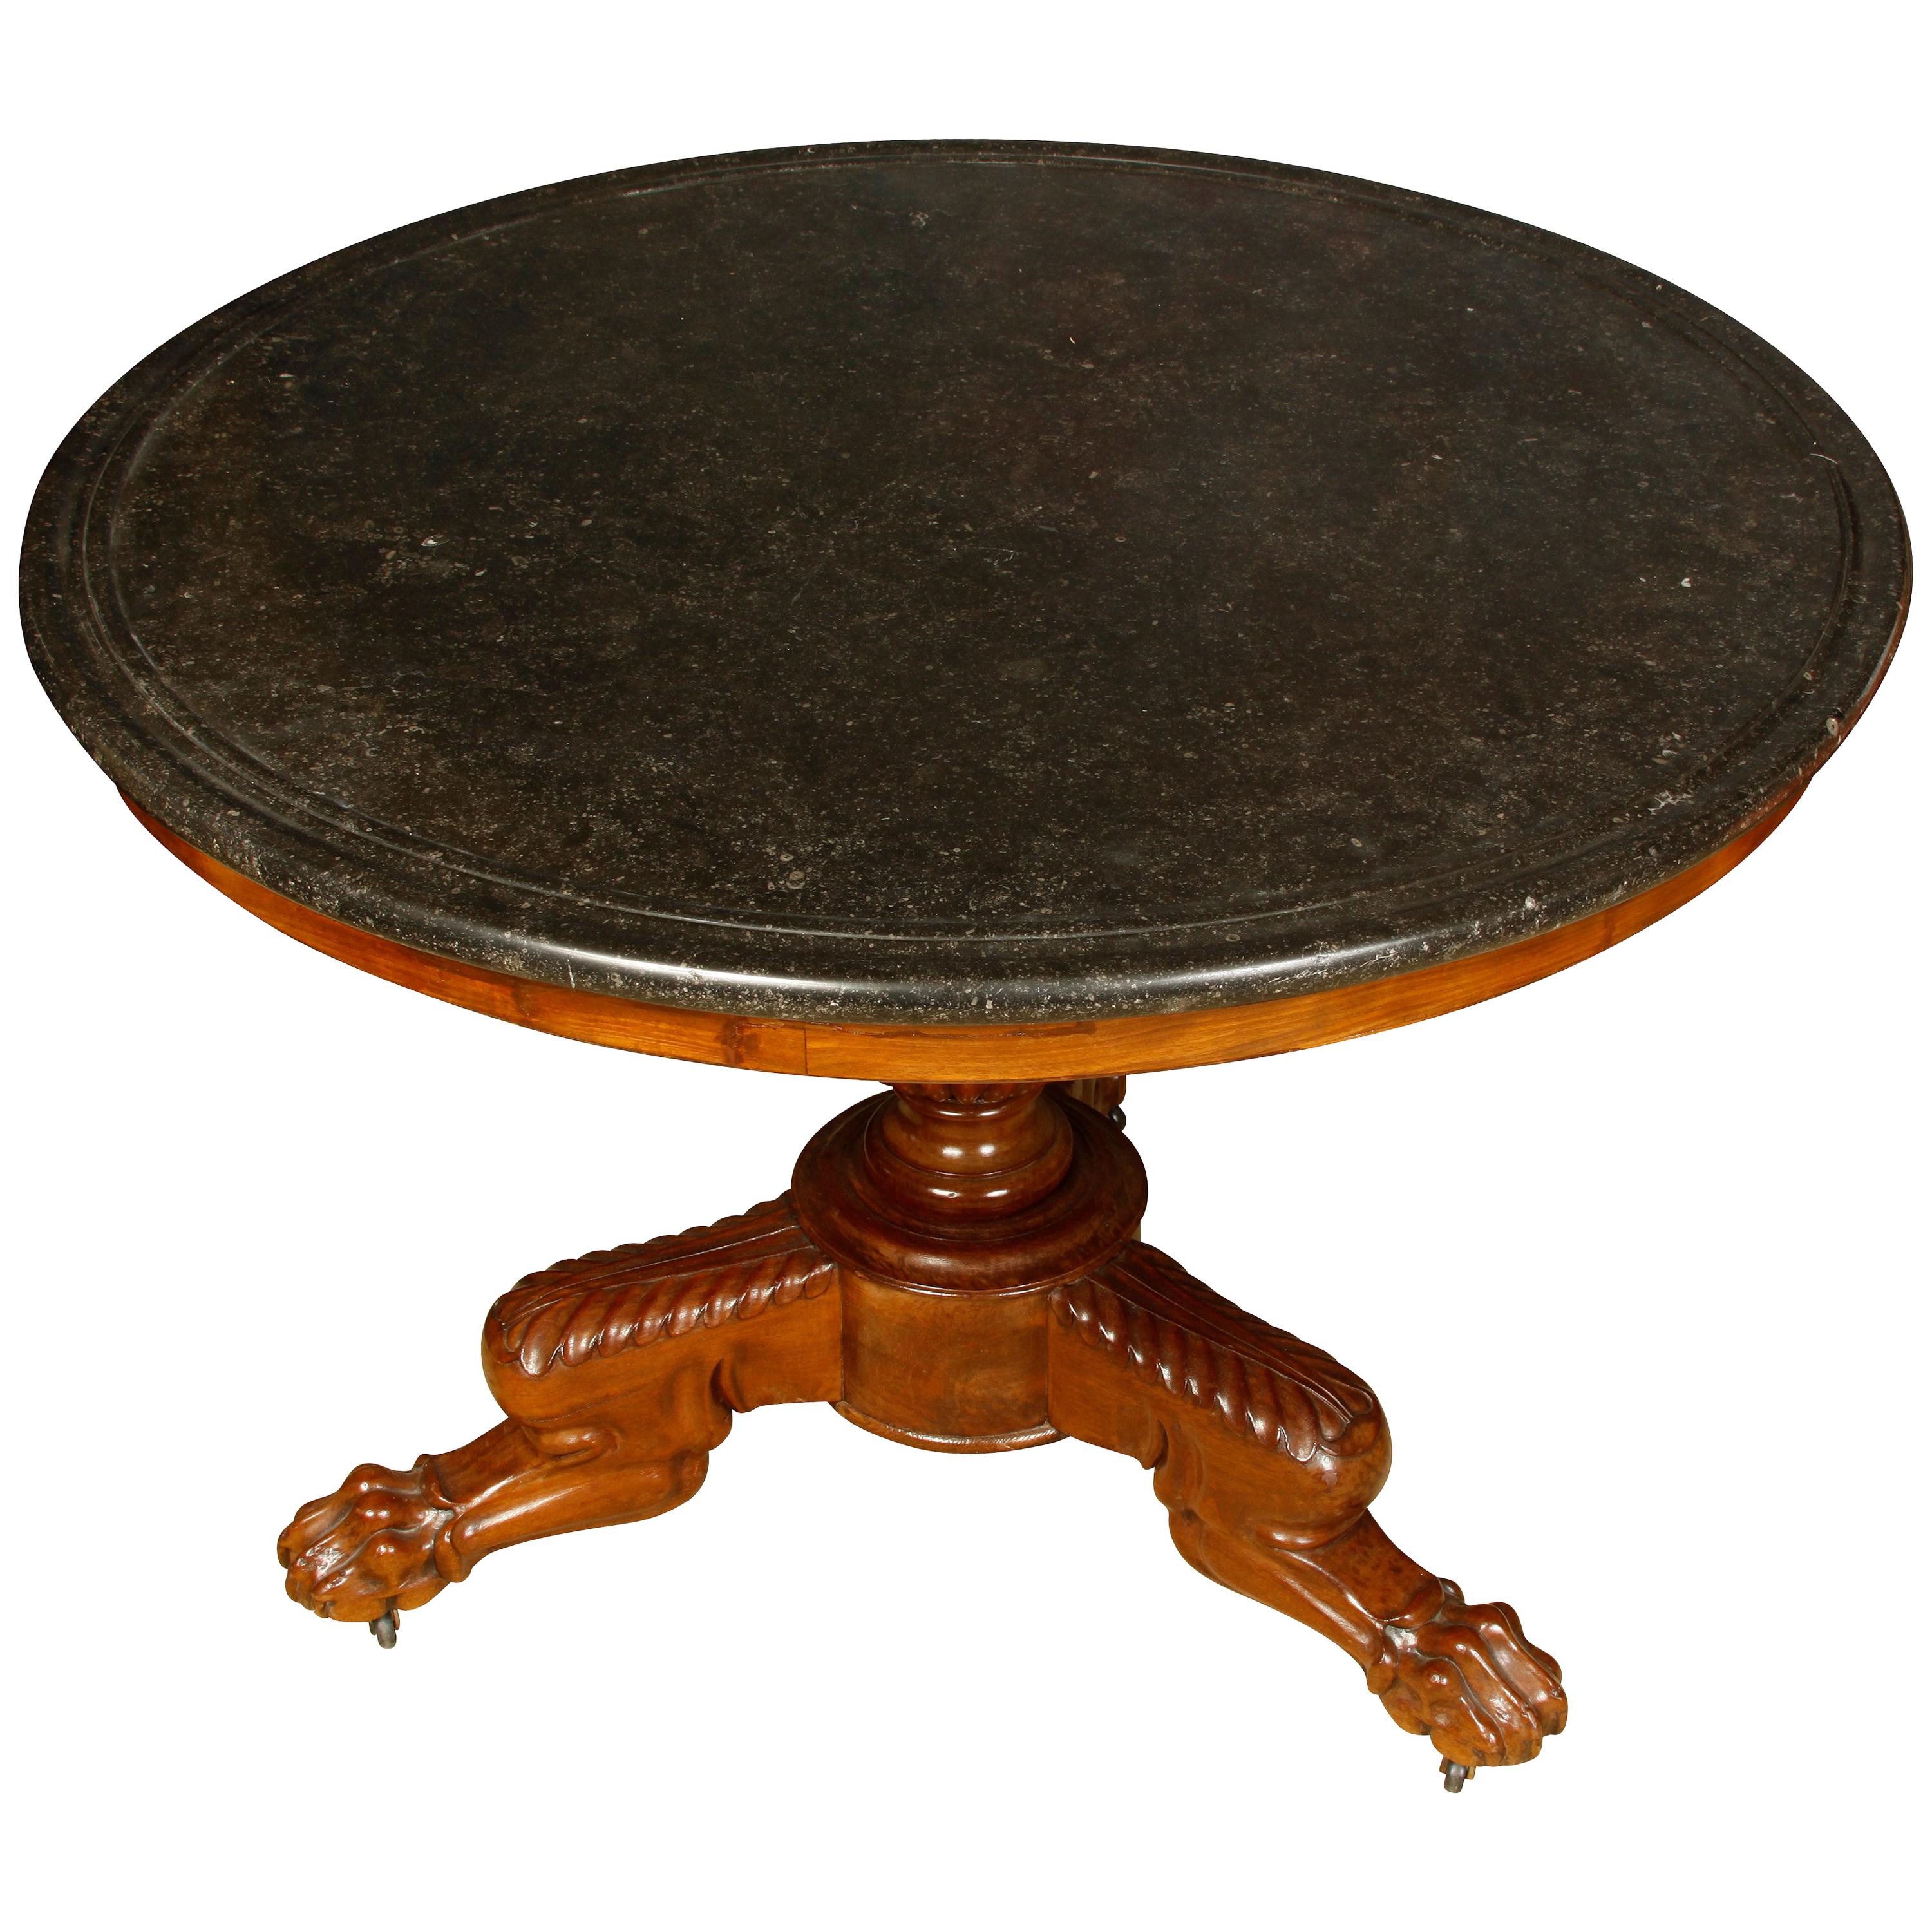 19th Century English Marble-Topped Pedestal Table